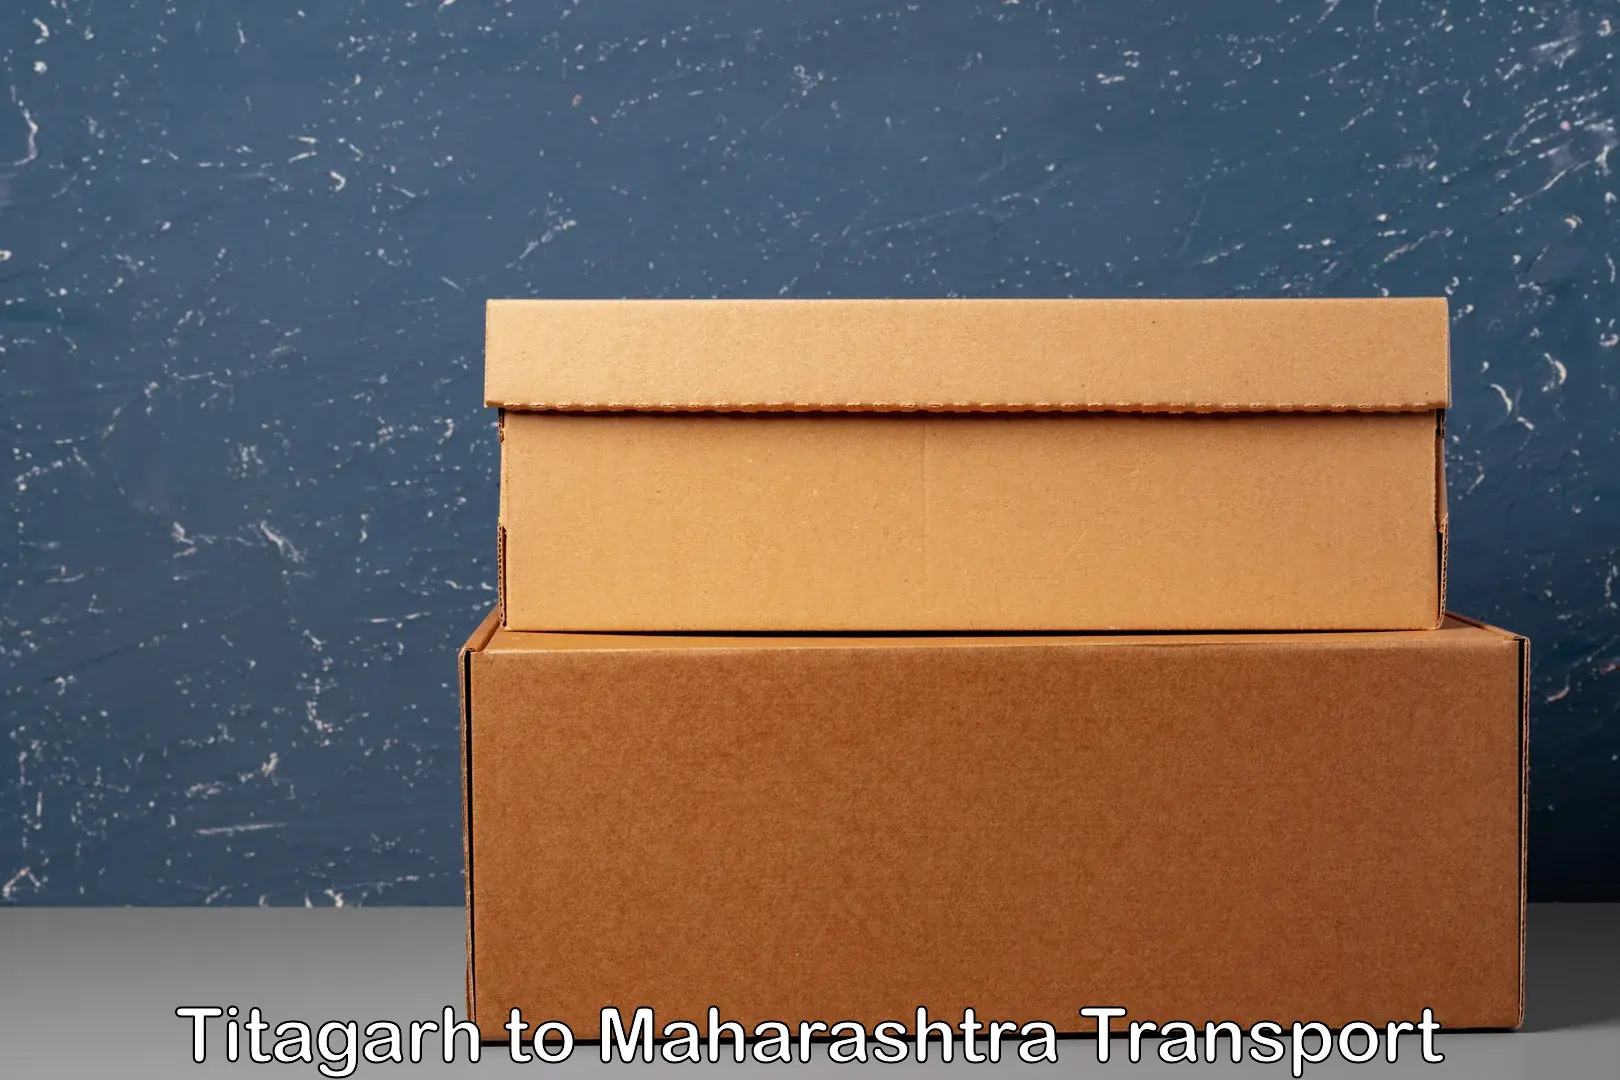 Air freight transport services in Titagarh to Thane